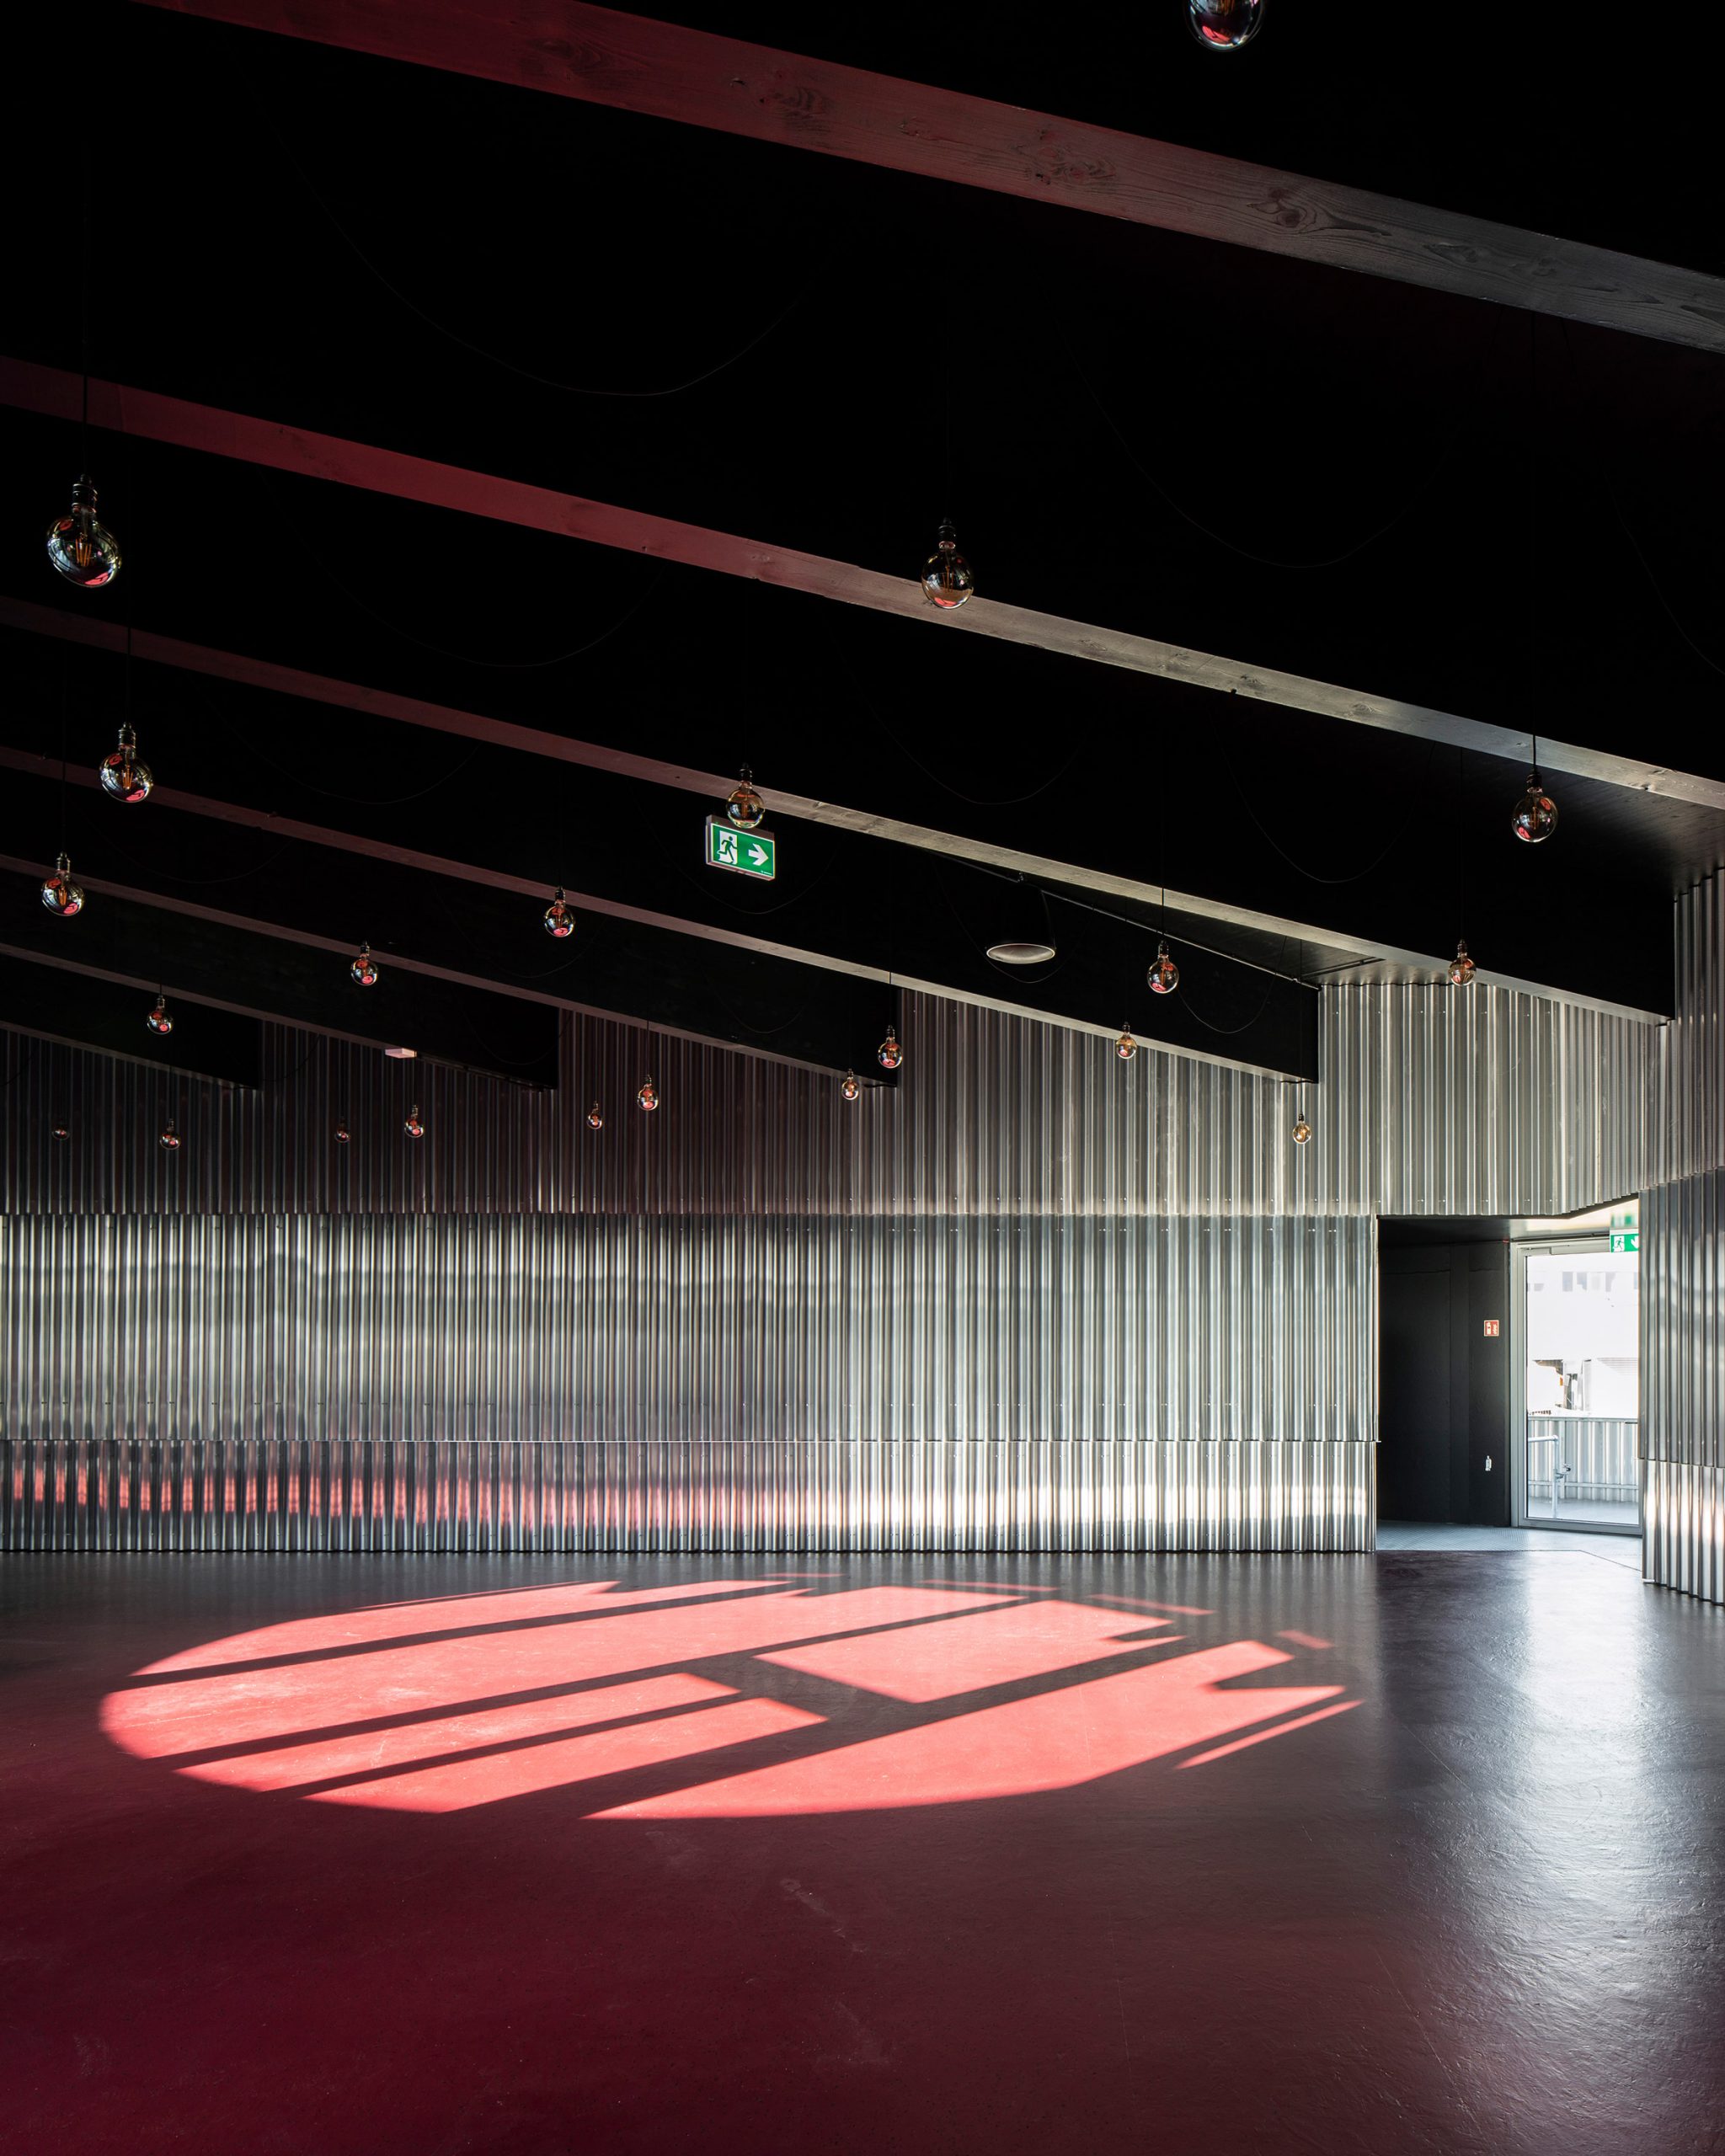 Refreshment space with cross-laminated timber roof